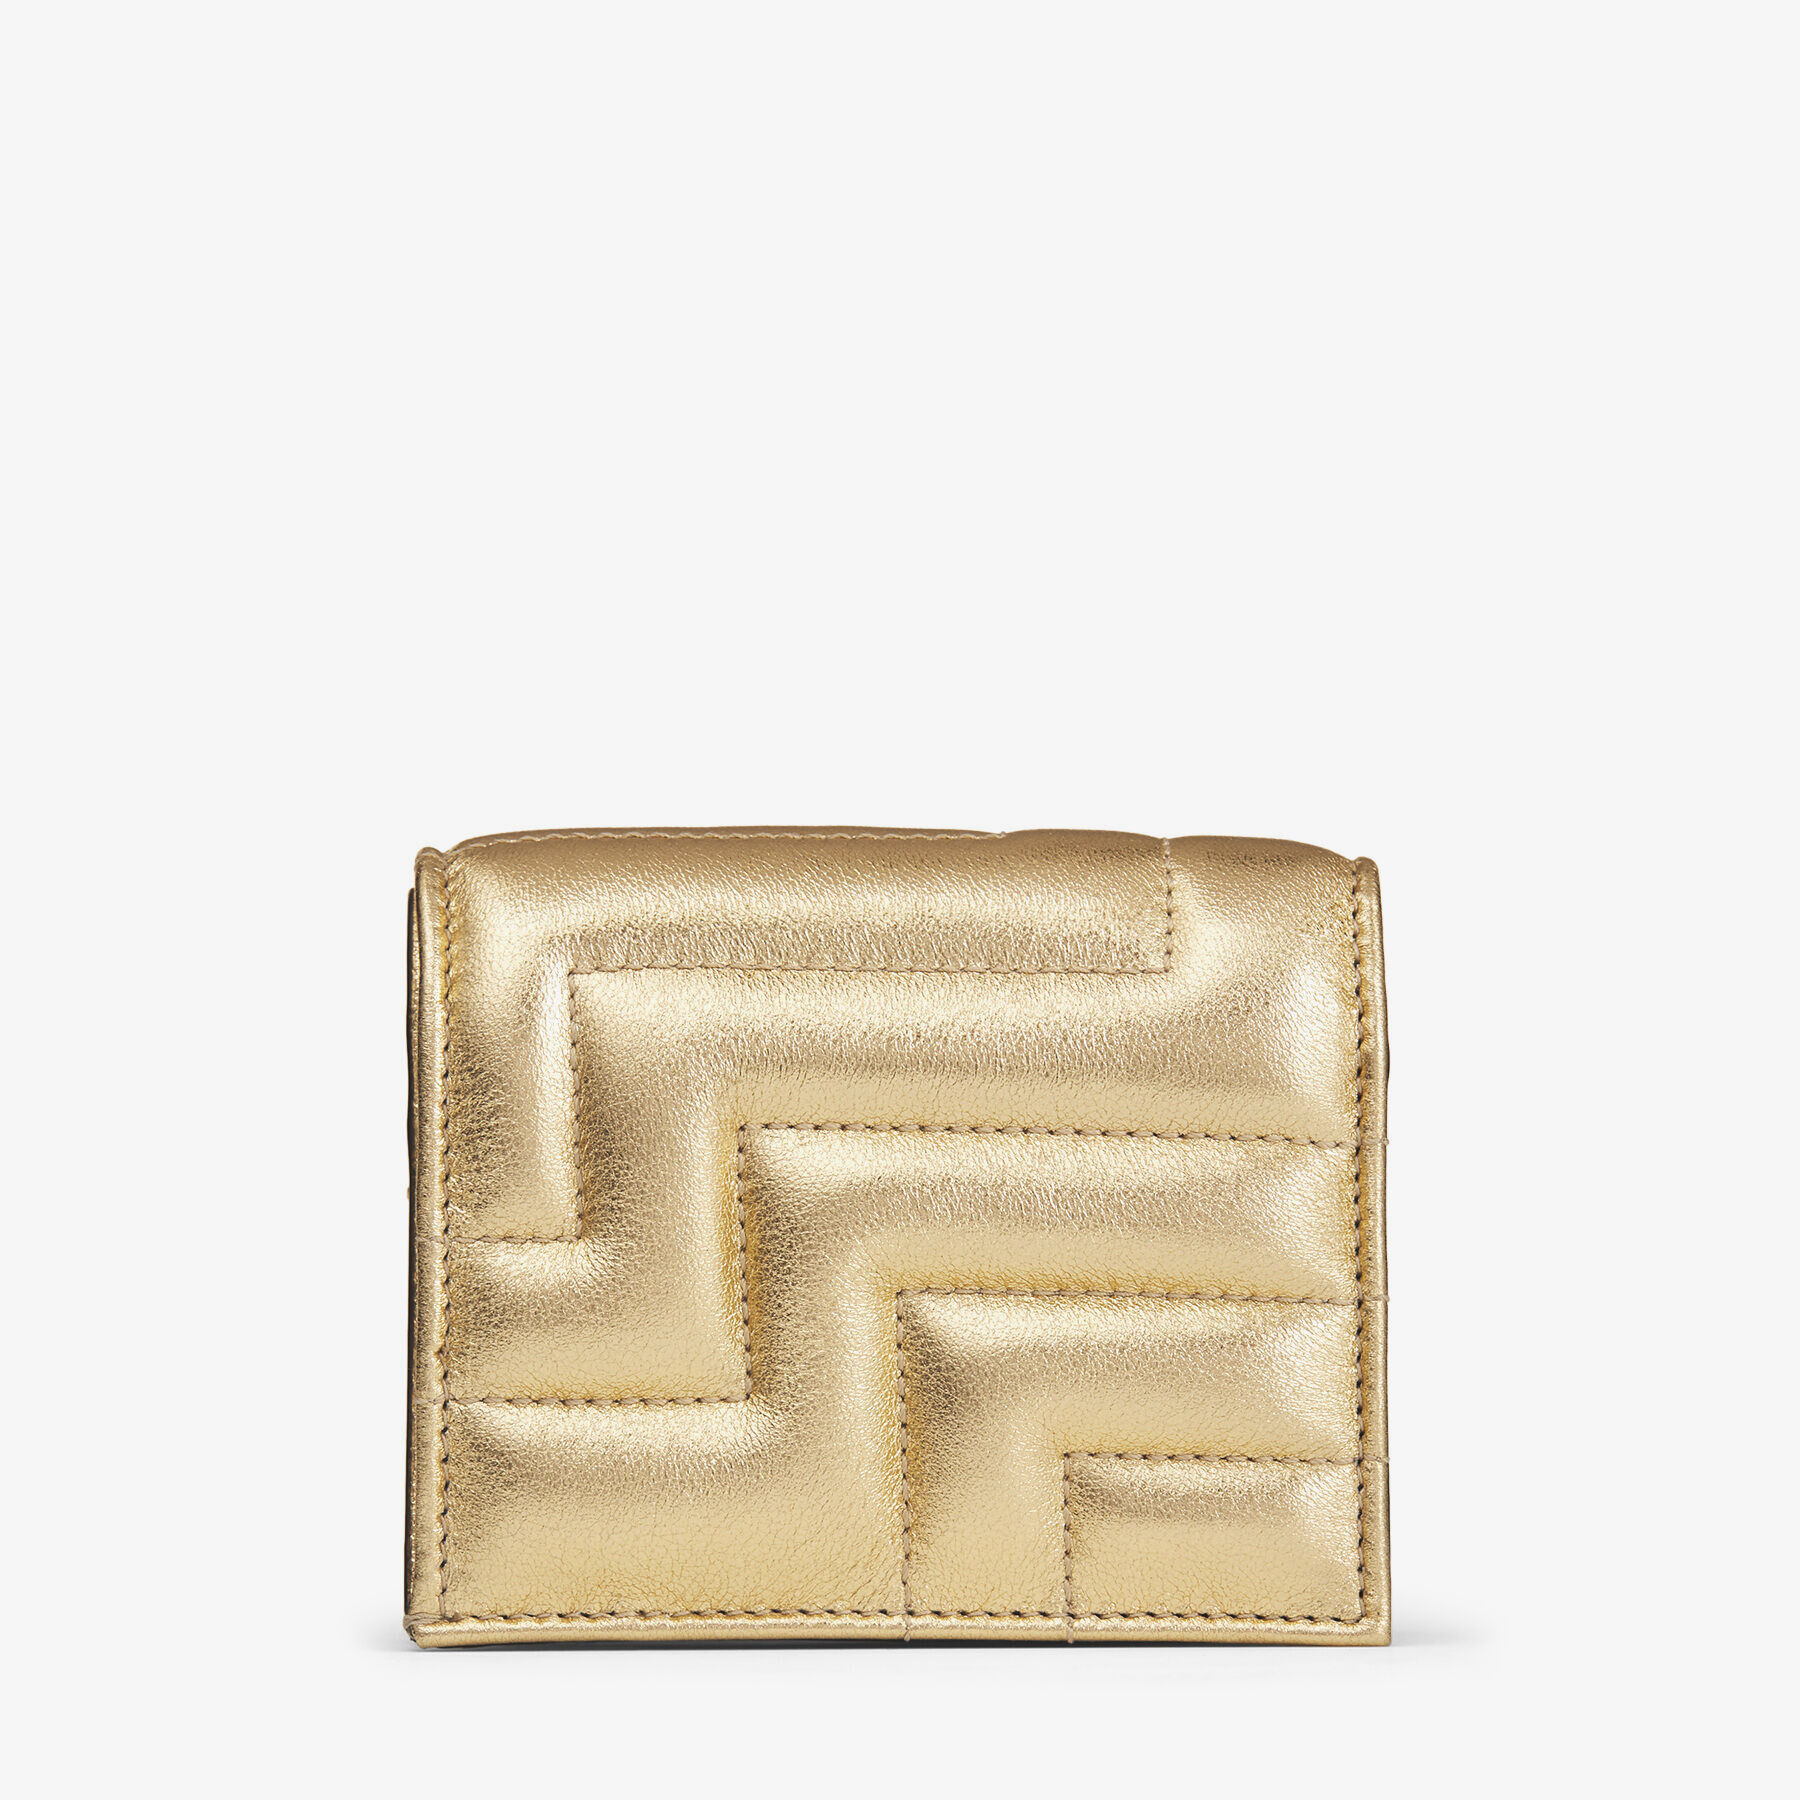 Gold Avenue Metallic Nappa Leather Wallet with Light Gold JC